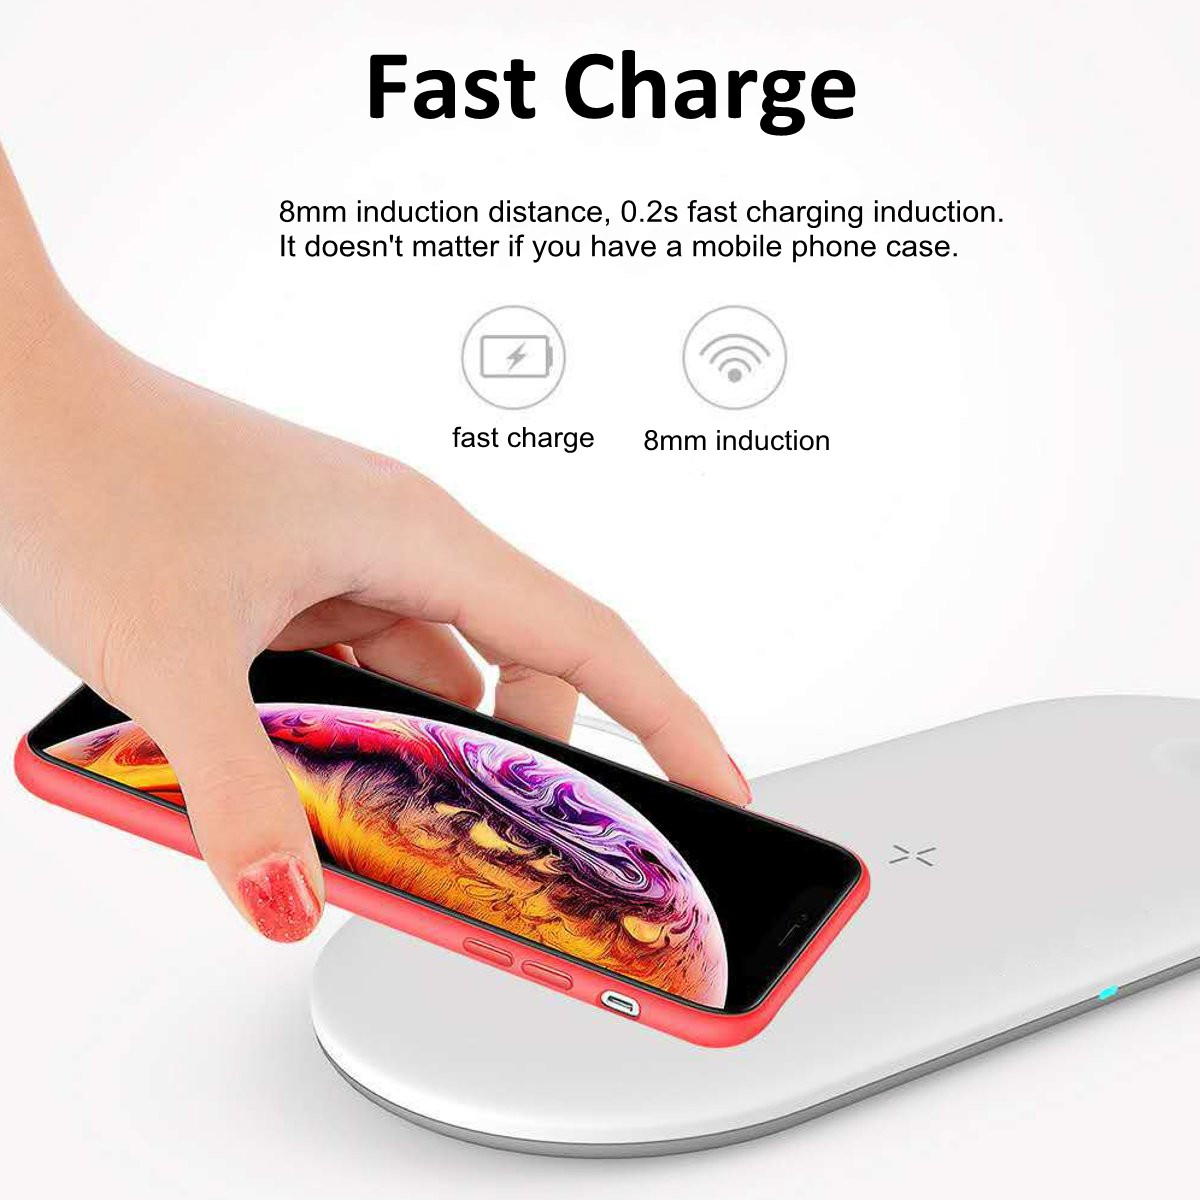 3-in-1-Qi-Wireless-Charger-Fast-Charging-Phone-Chager-For-Smart-Phone-Apple-Watch-Series-Apple-AirPo-1634158-4